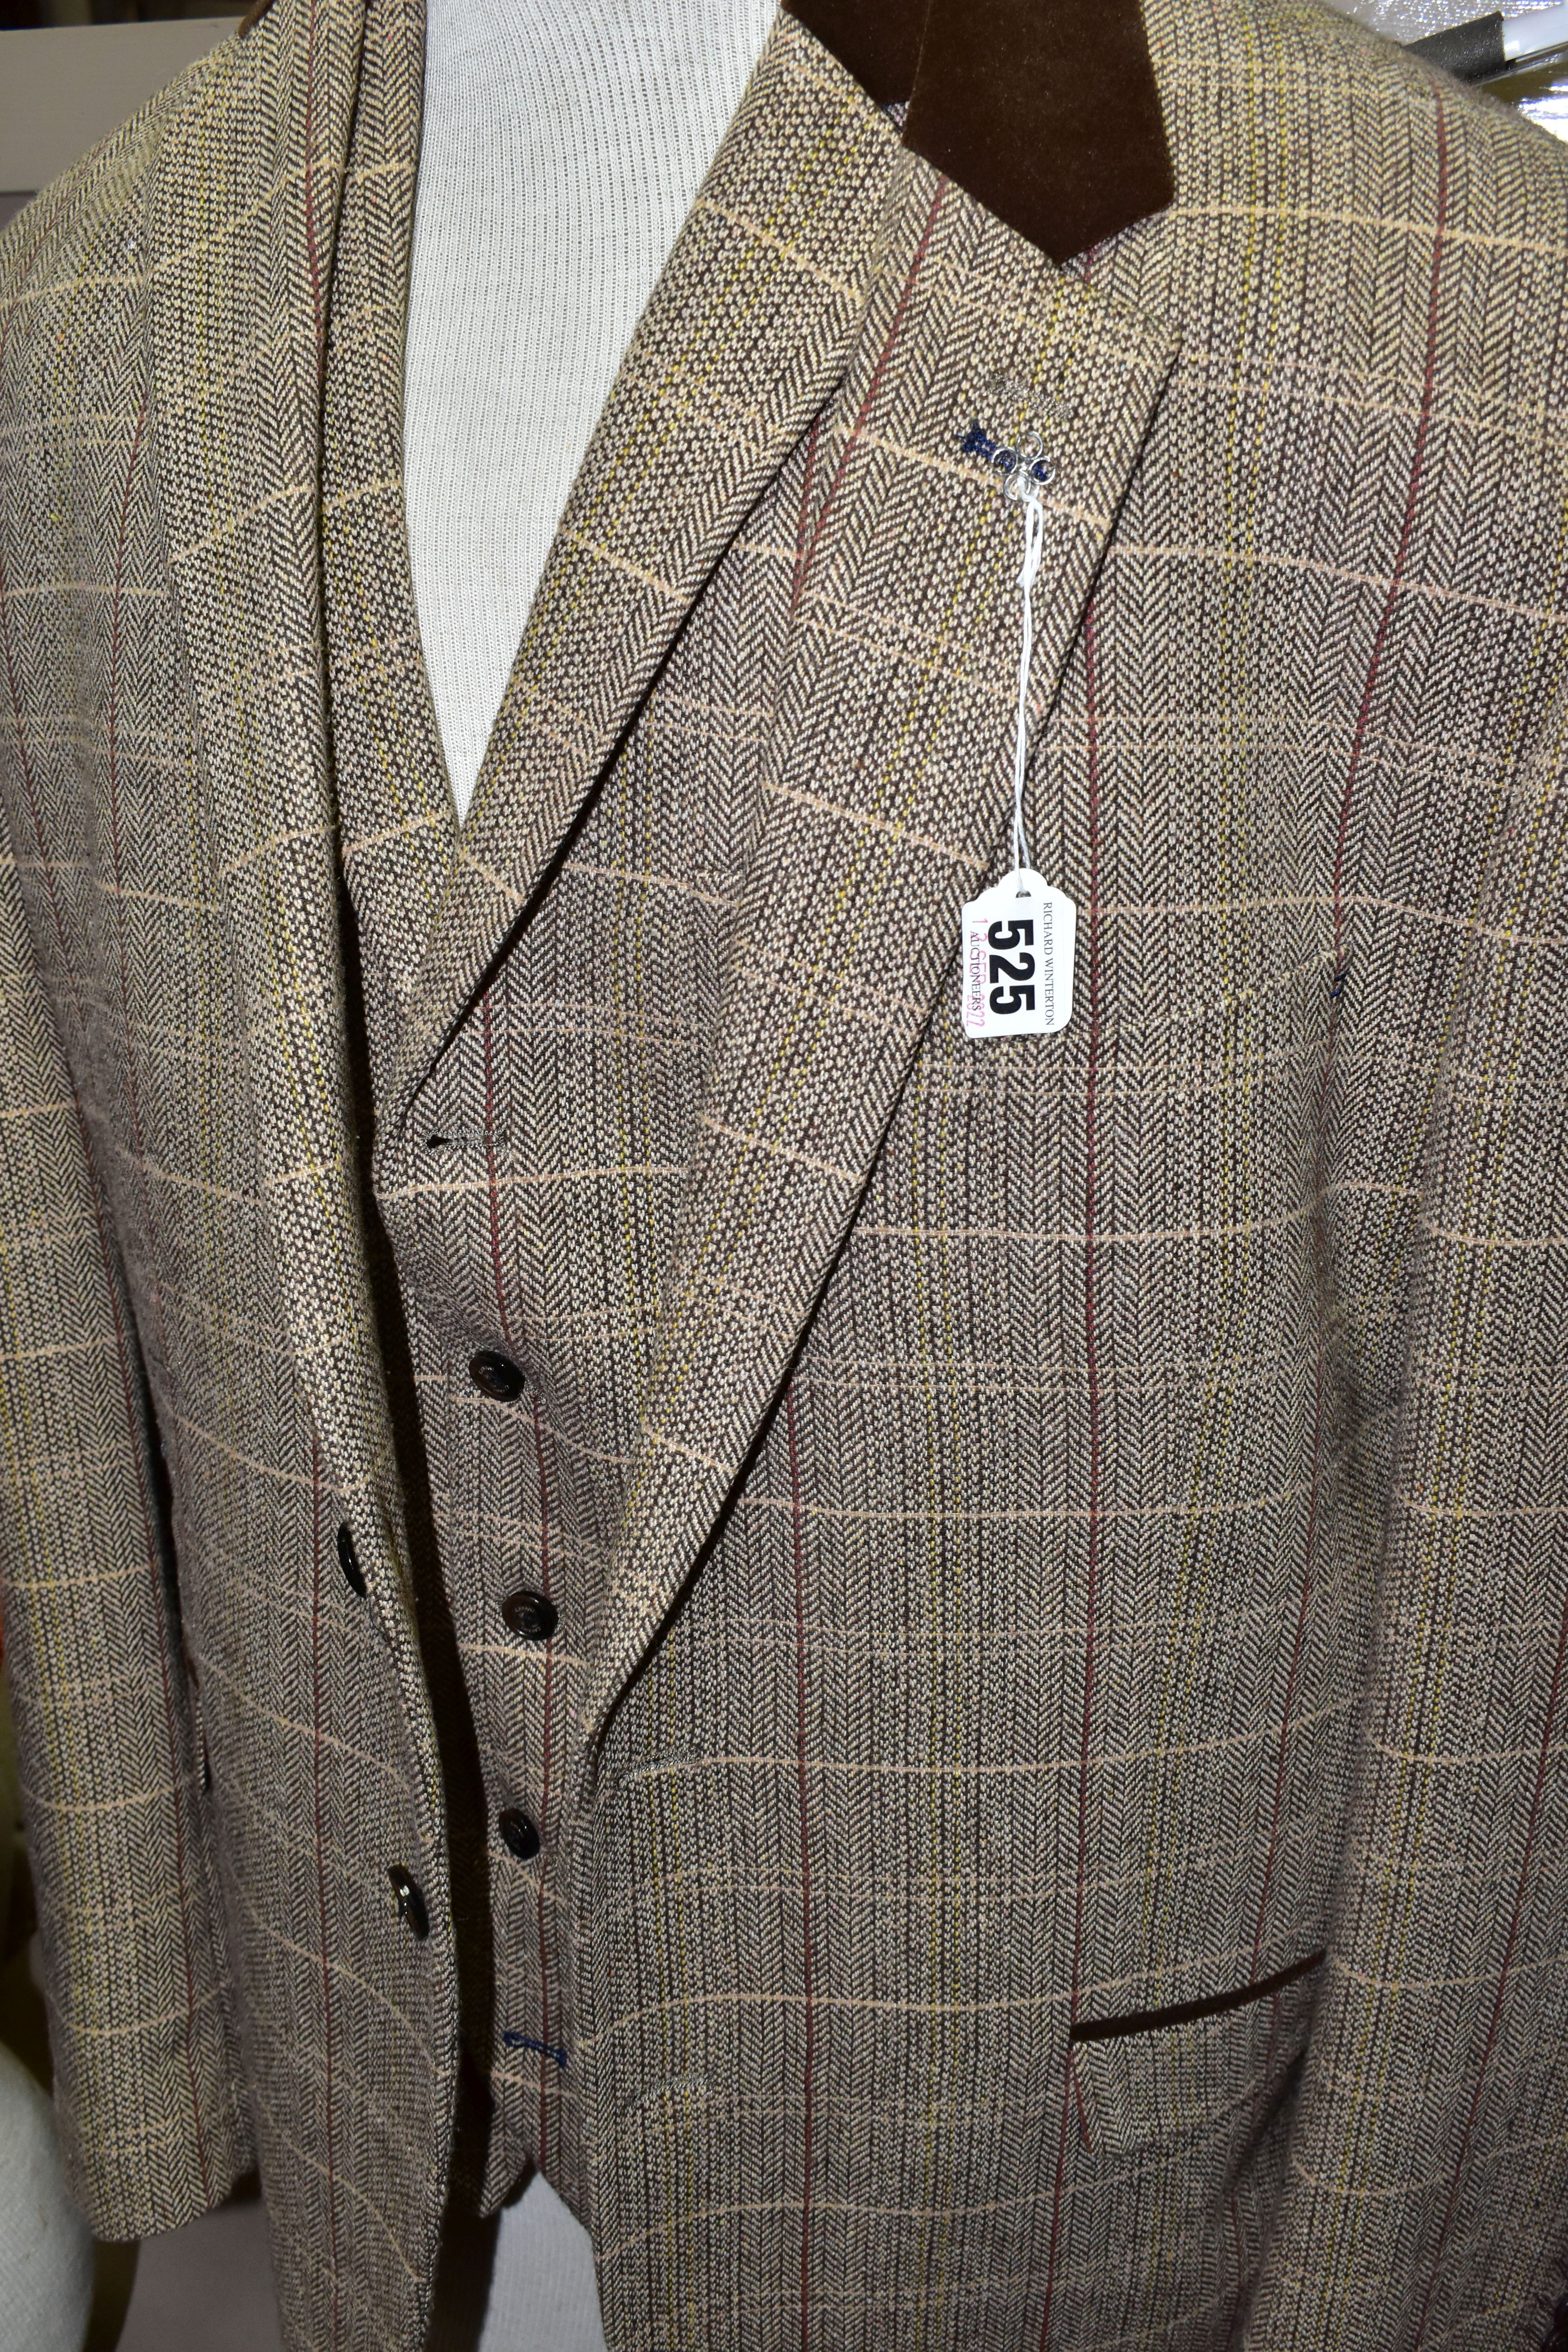 A HOUSE OF CAVANI THREE PIECE SUIT, comprising jacket, trousers and waist coat in a brown tweed- - Image 3 of 8